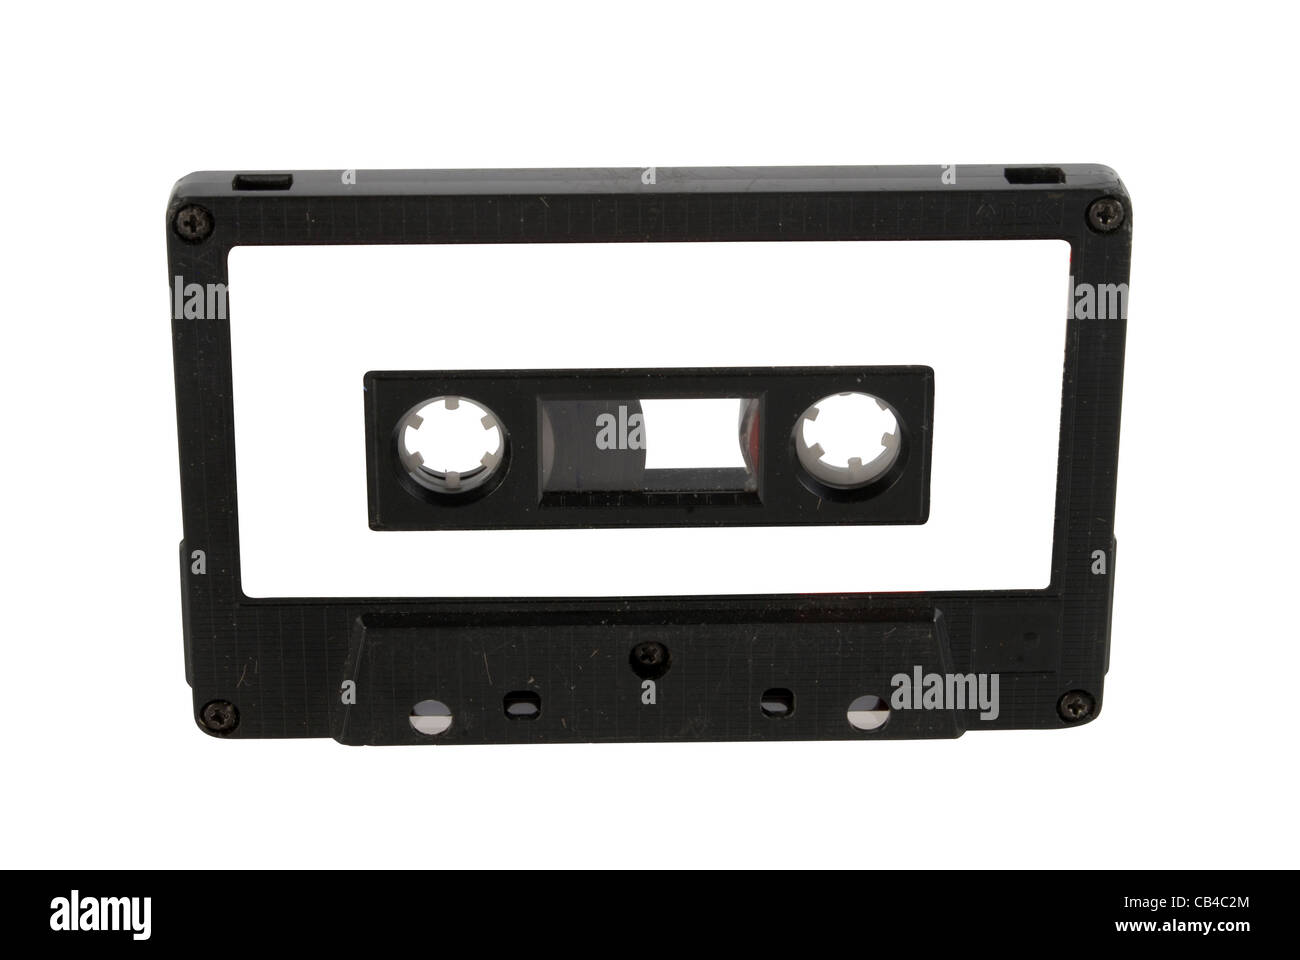 Single black audio cassette and label isolated on white background. Included clipping path for each part, so you can easily cut it out and place over the top of a design. Stock Photo